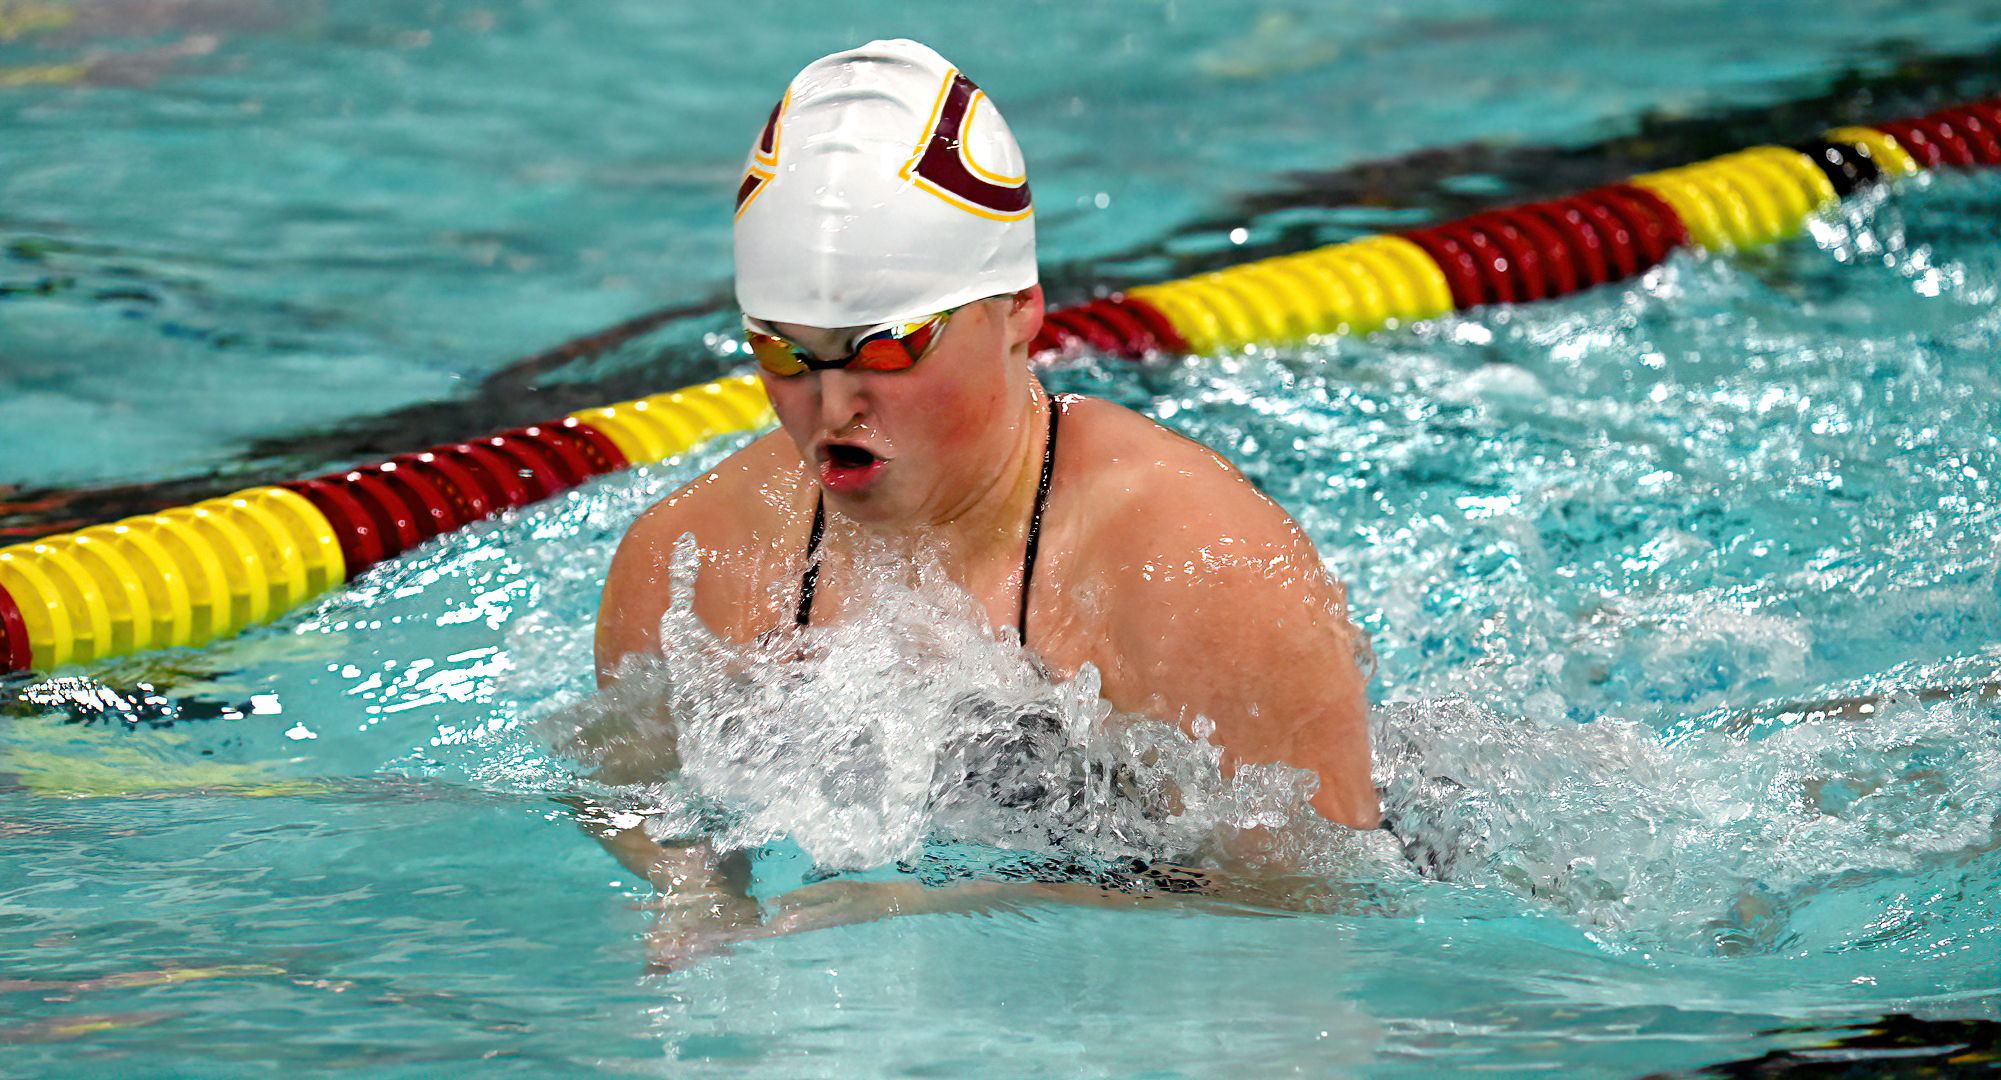 First-year swimmer Callie Metsala scored team points in the 100-yard butterfly, 100 & 200-yard breaststroke and 200-yard IM at the Macalester Invite.